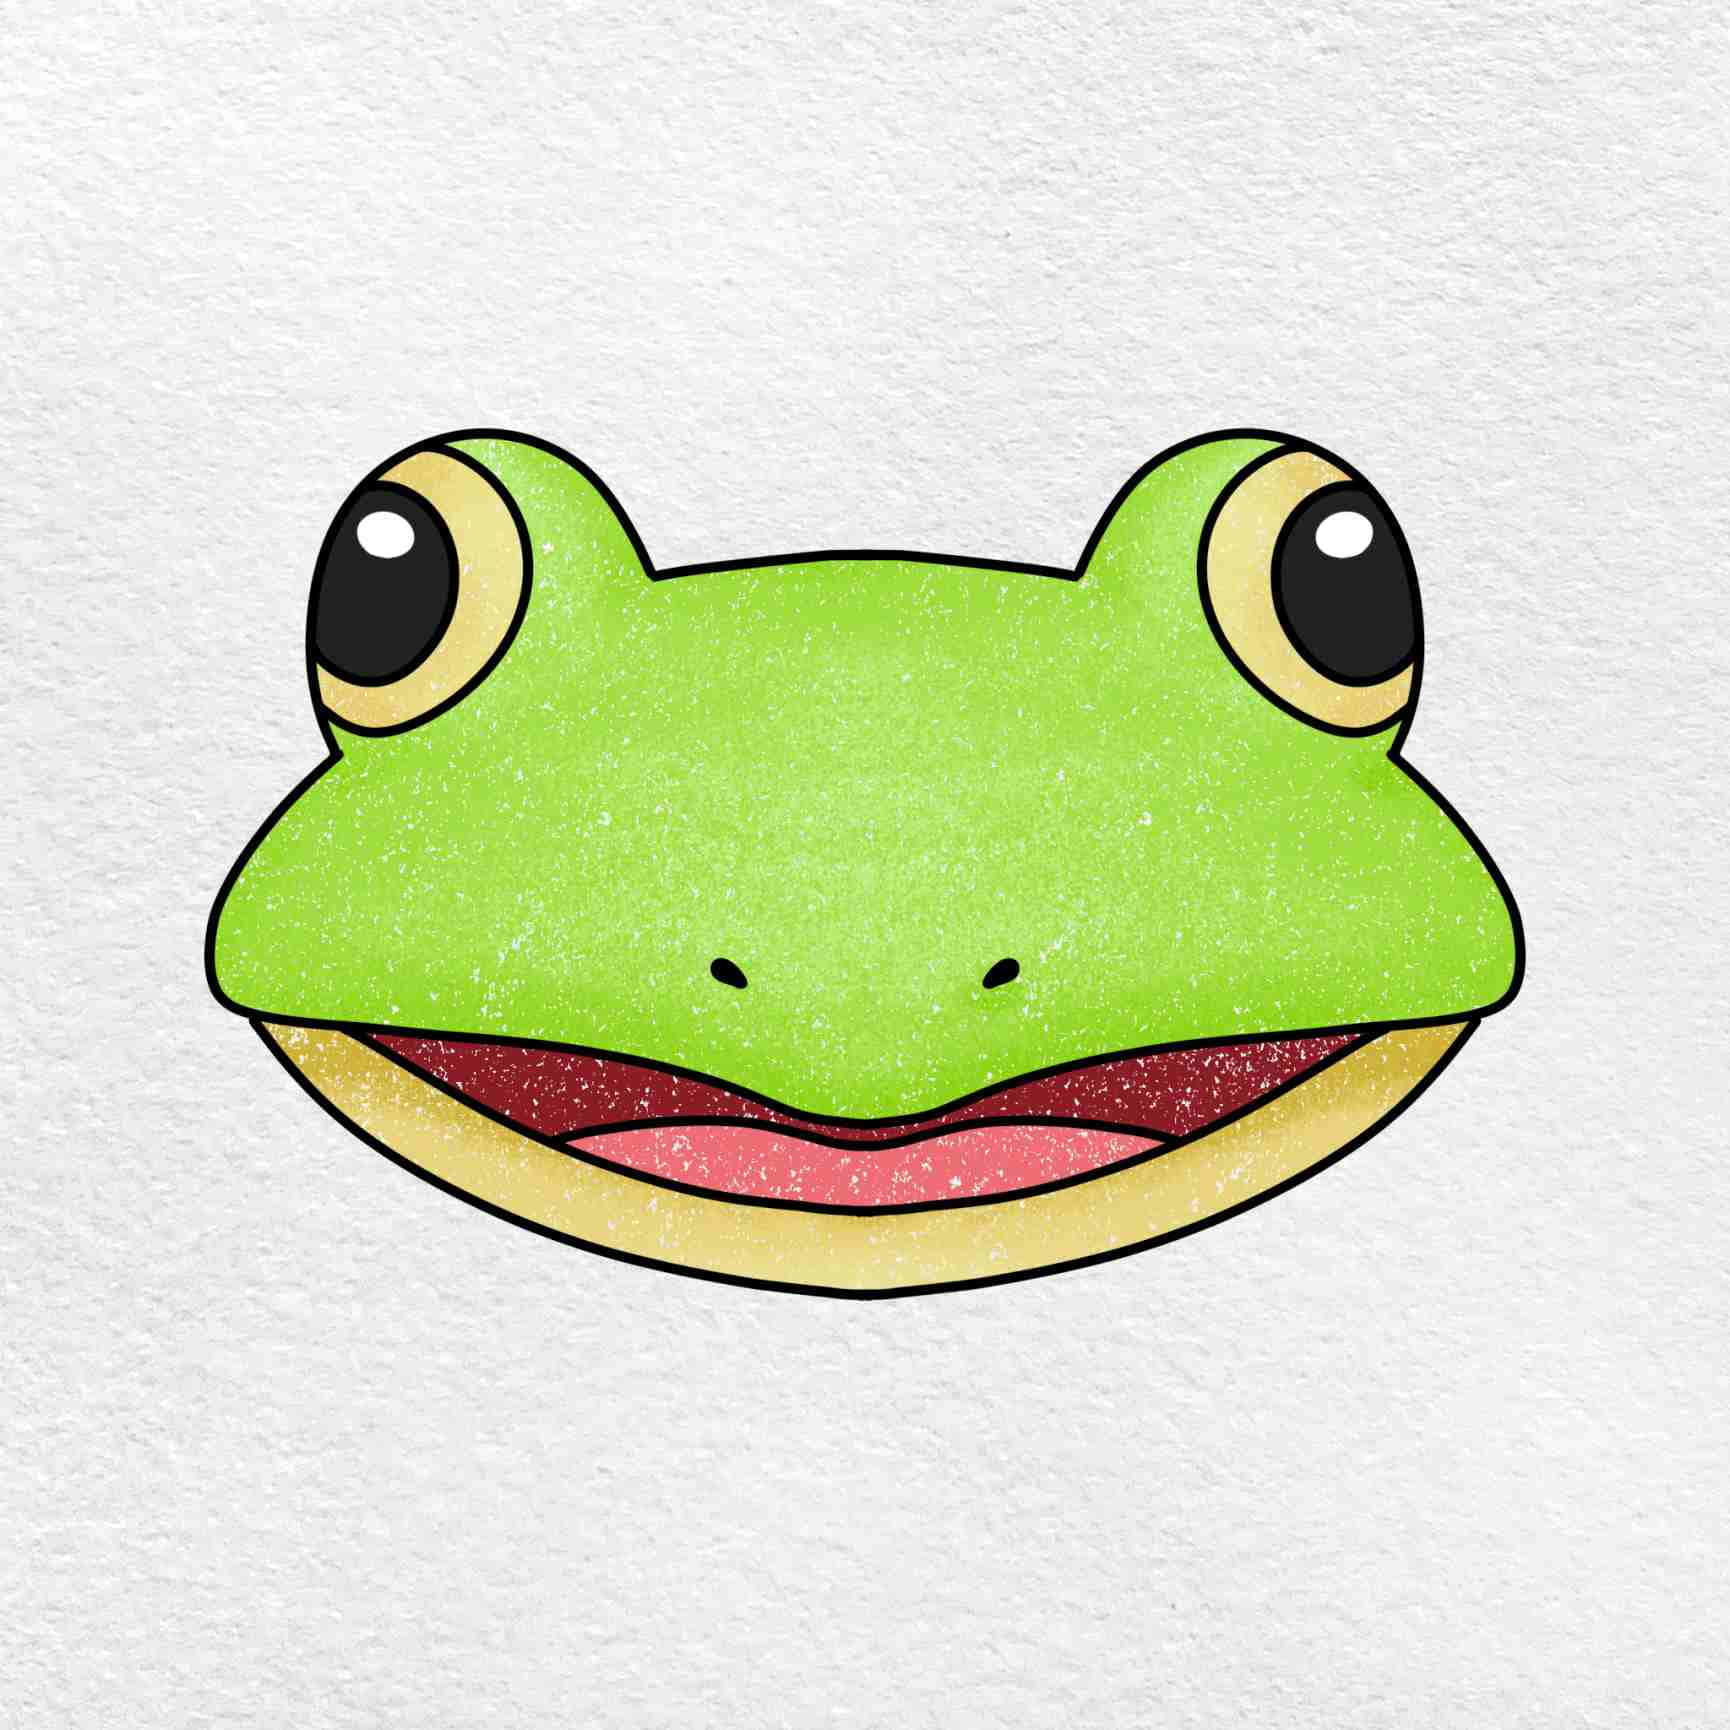 A Frog Drawing of a Smiling Amphibian